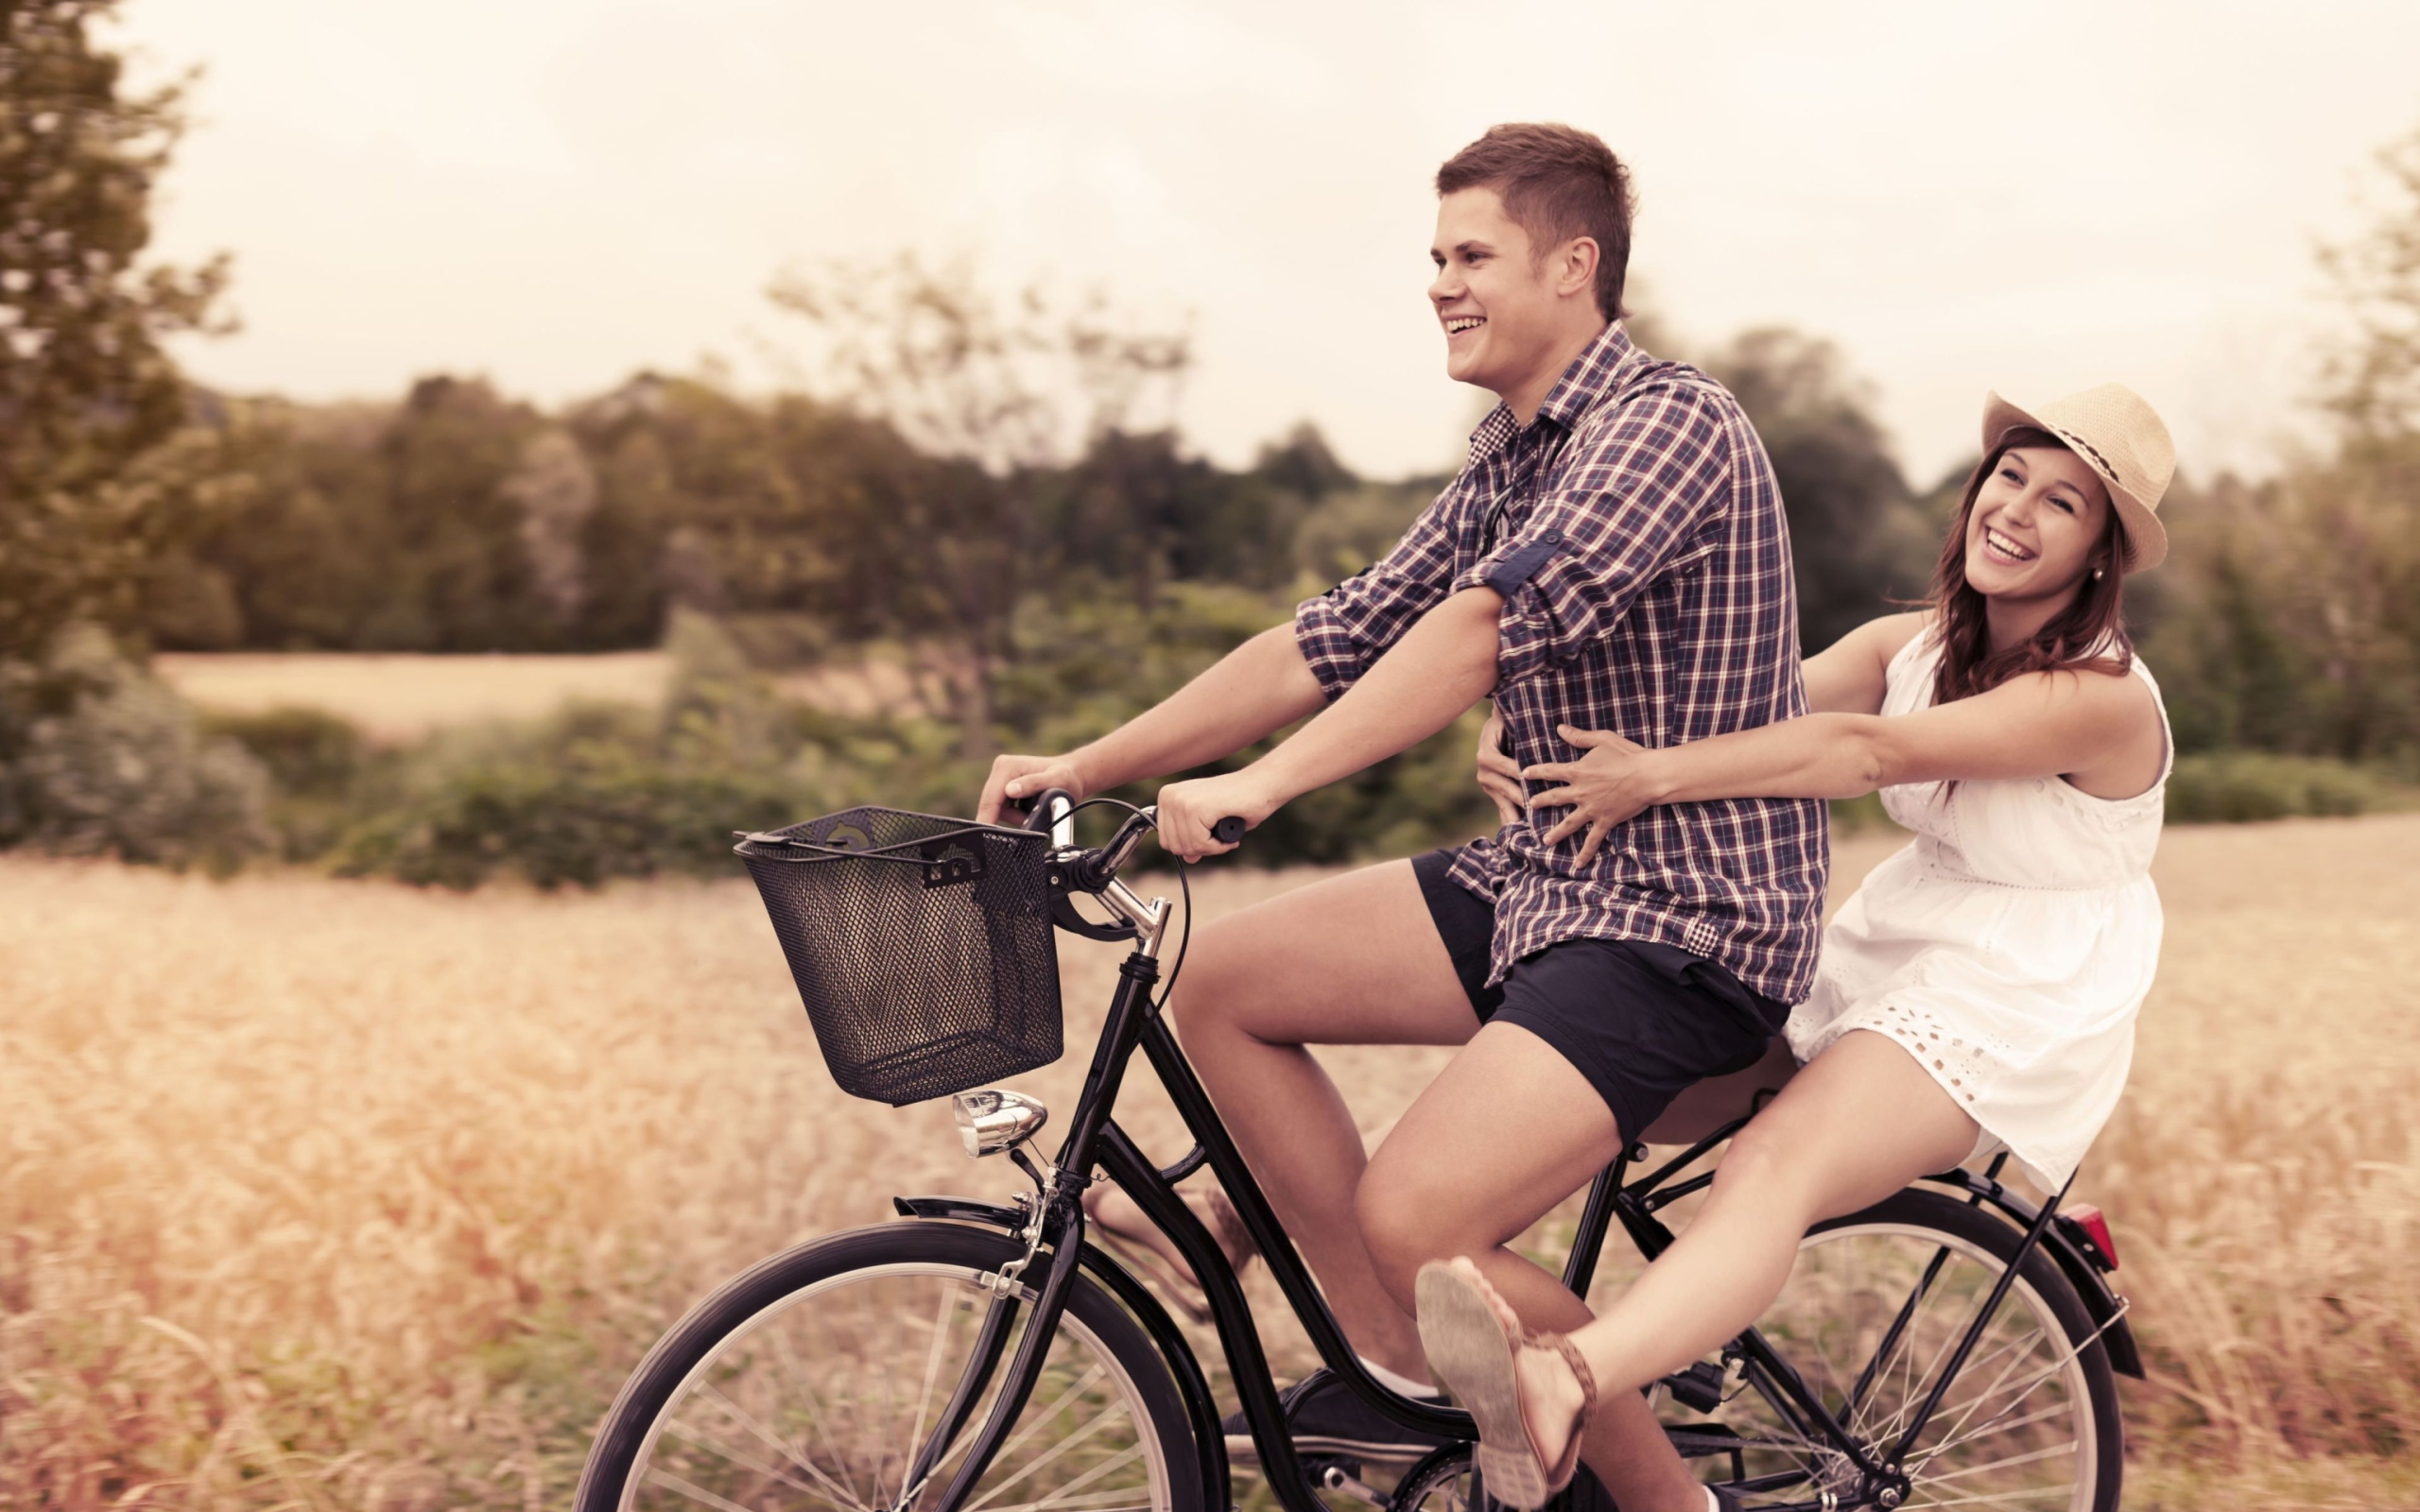 Couple On Bicycle wallpaper 2560x1600